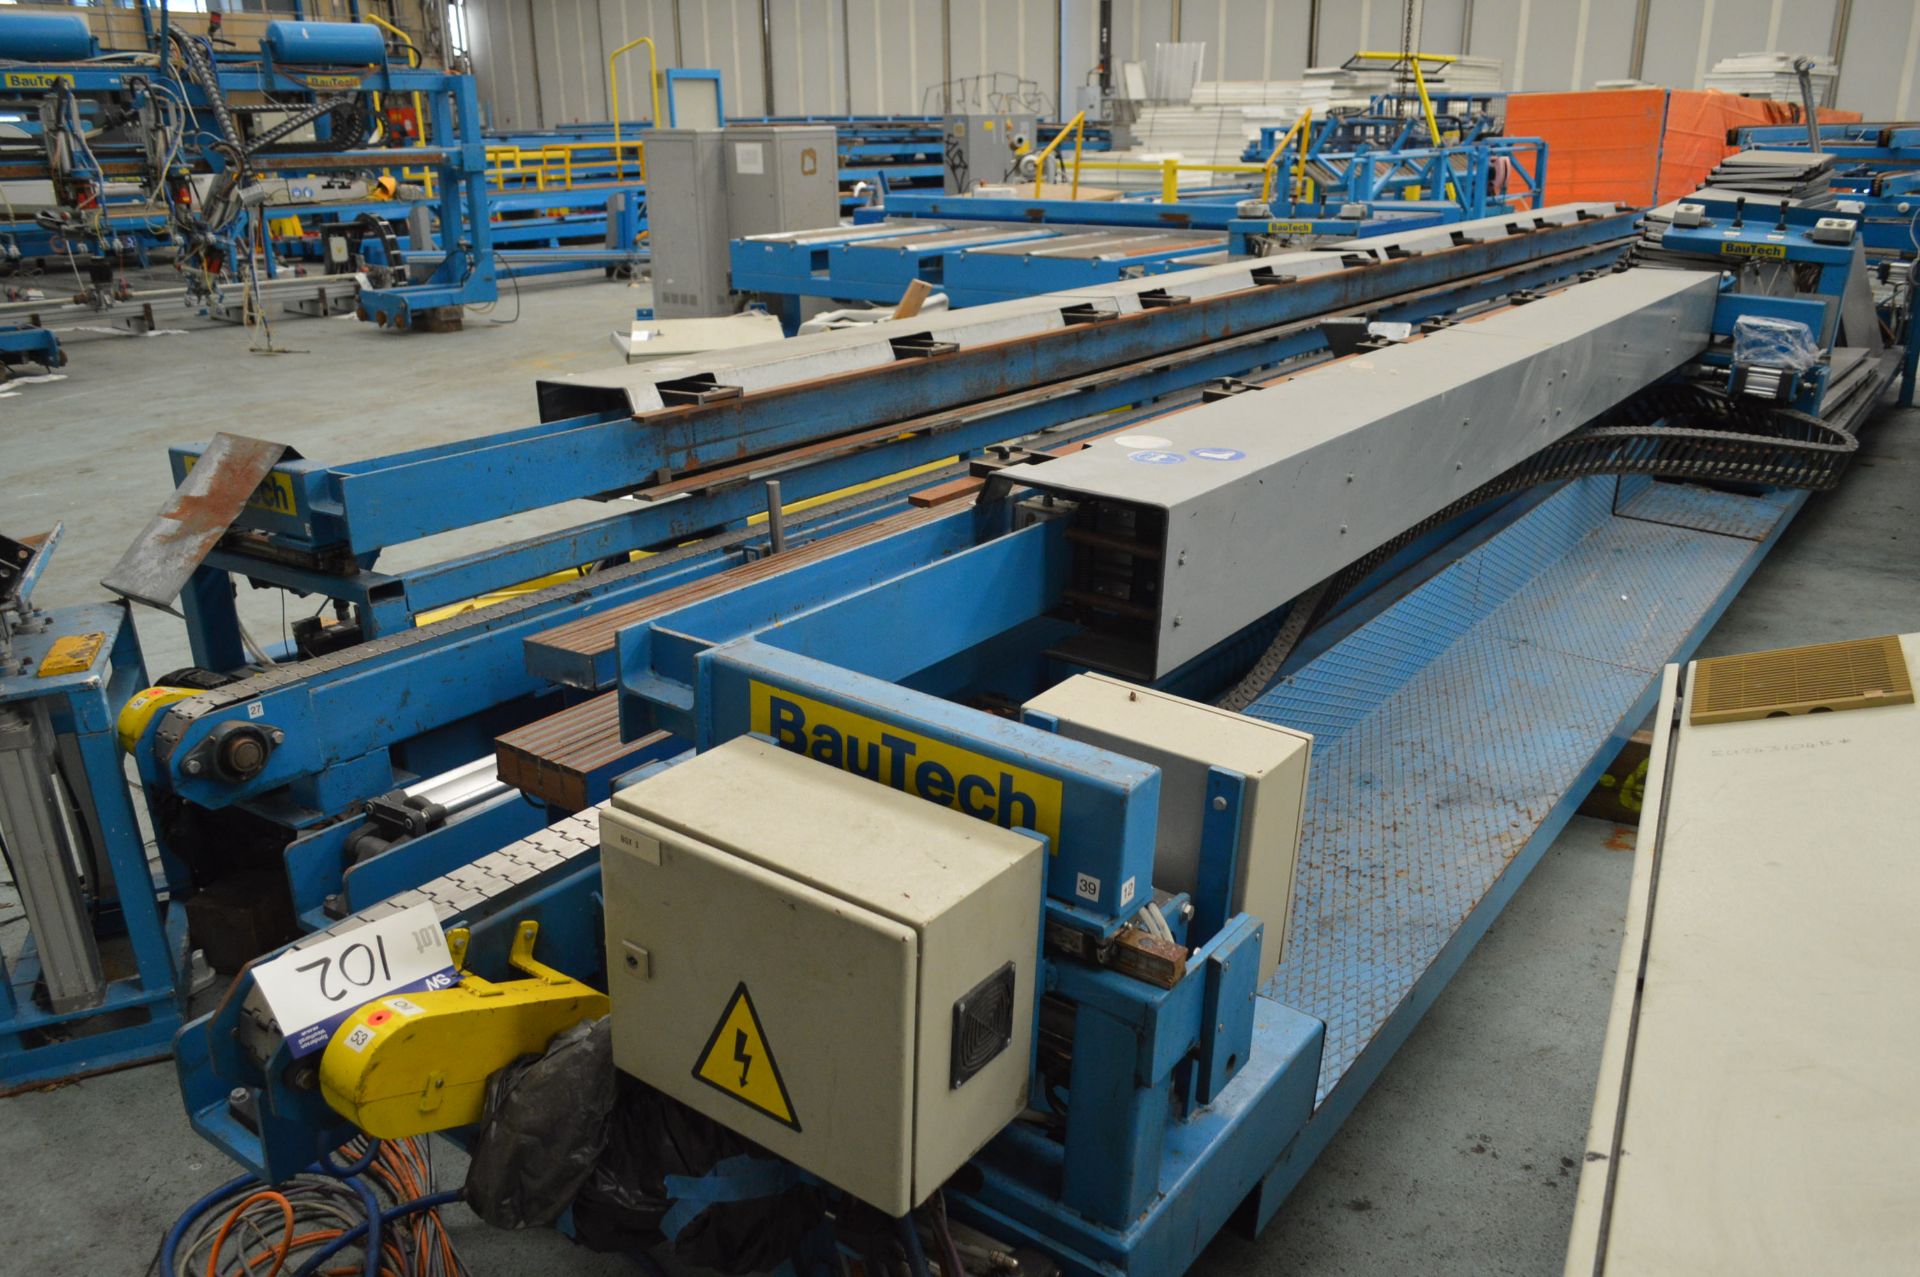 BauTech Conveyor Equipment, as set out and as indicated, with control panel - Bild 2 aus 3